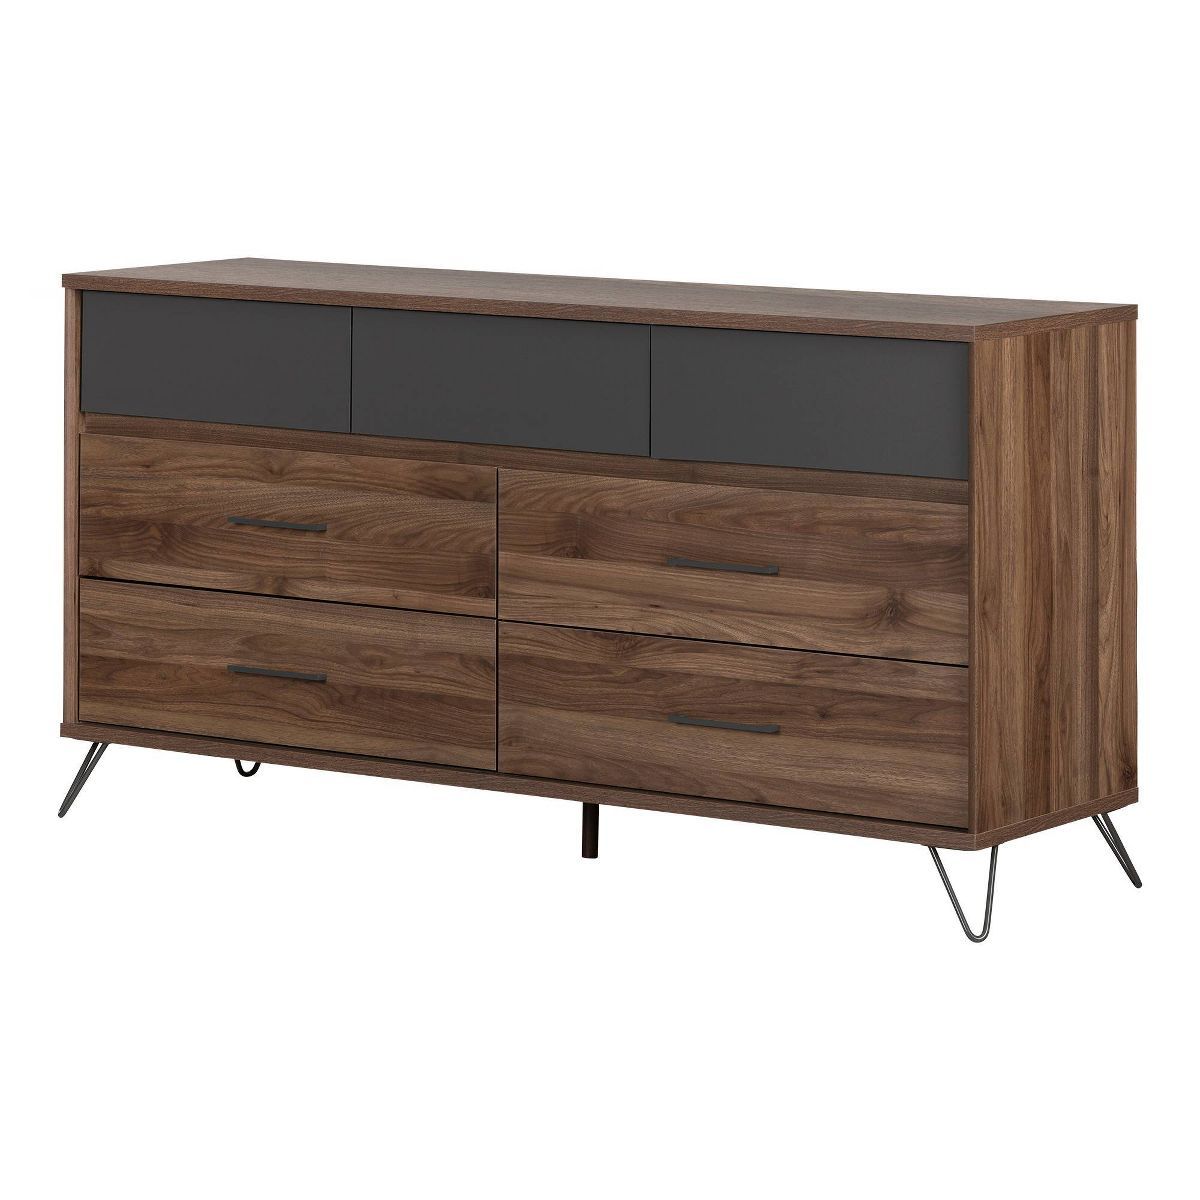 Olwyn 7 Drawer Double Dresser Natural Walnut/Charcoal - South Shore | Target